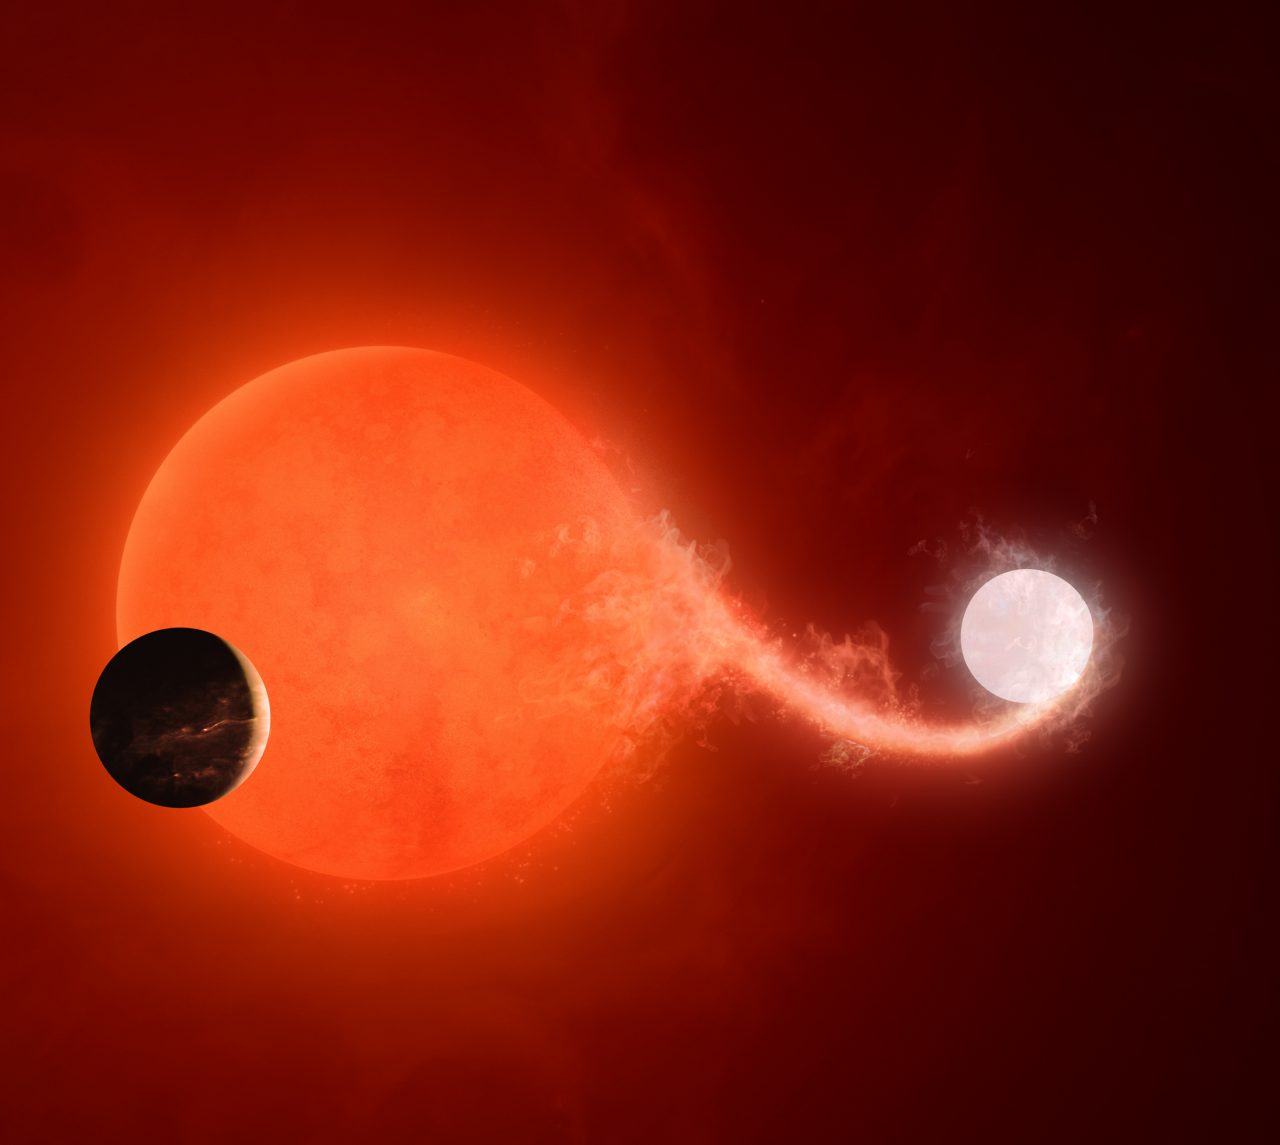 Artist's interpretation of the planet Halla orbiting two stars, a white dwarf and a red giant, as they undergo a mass transfer.